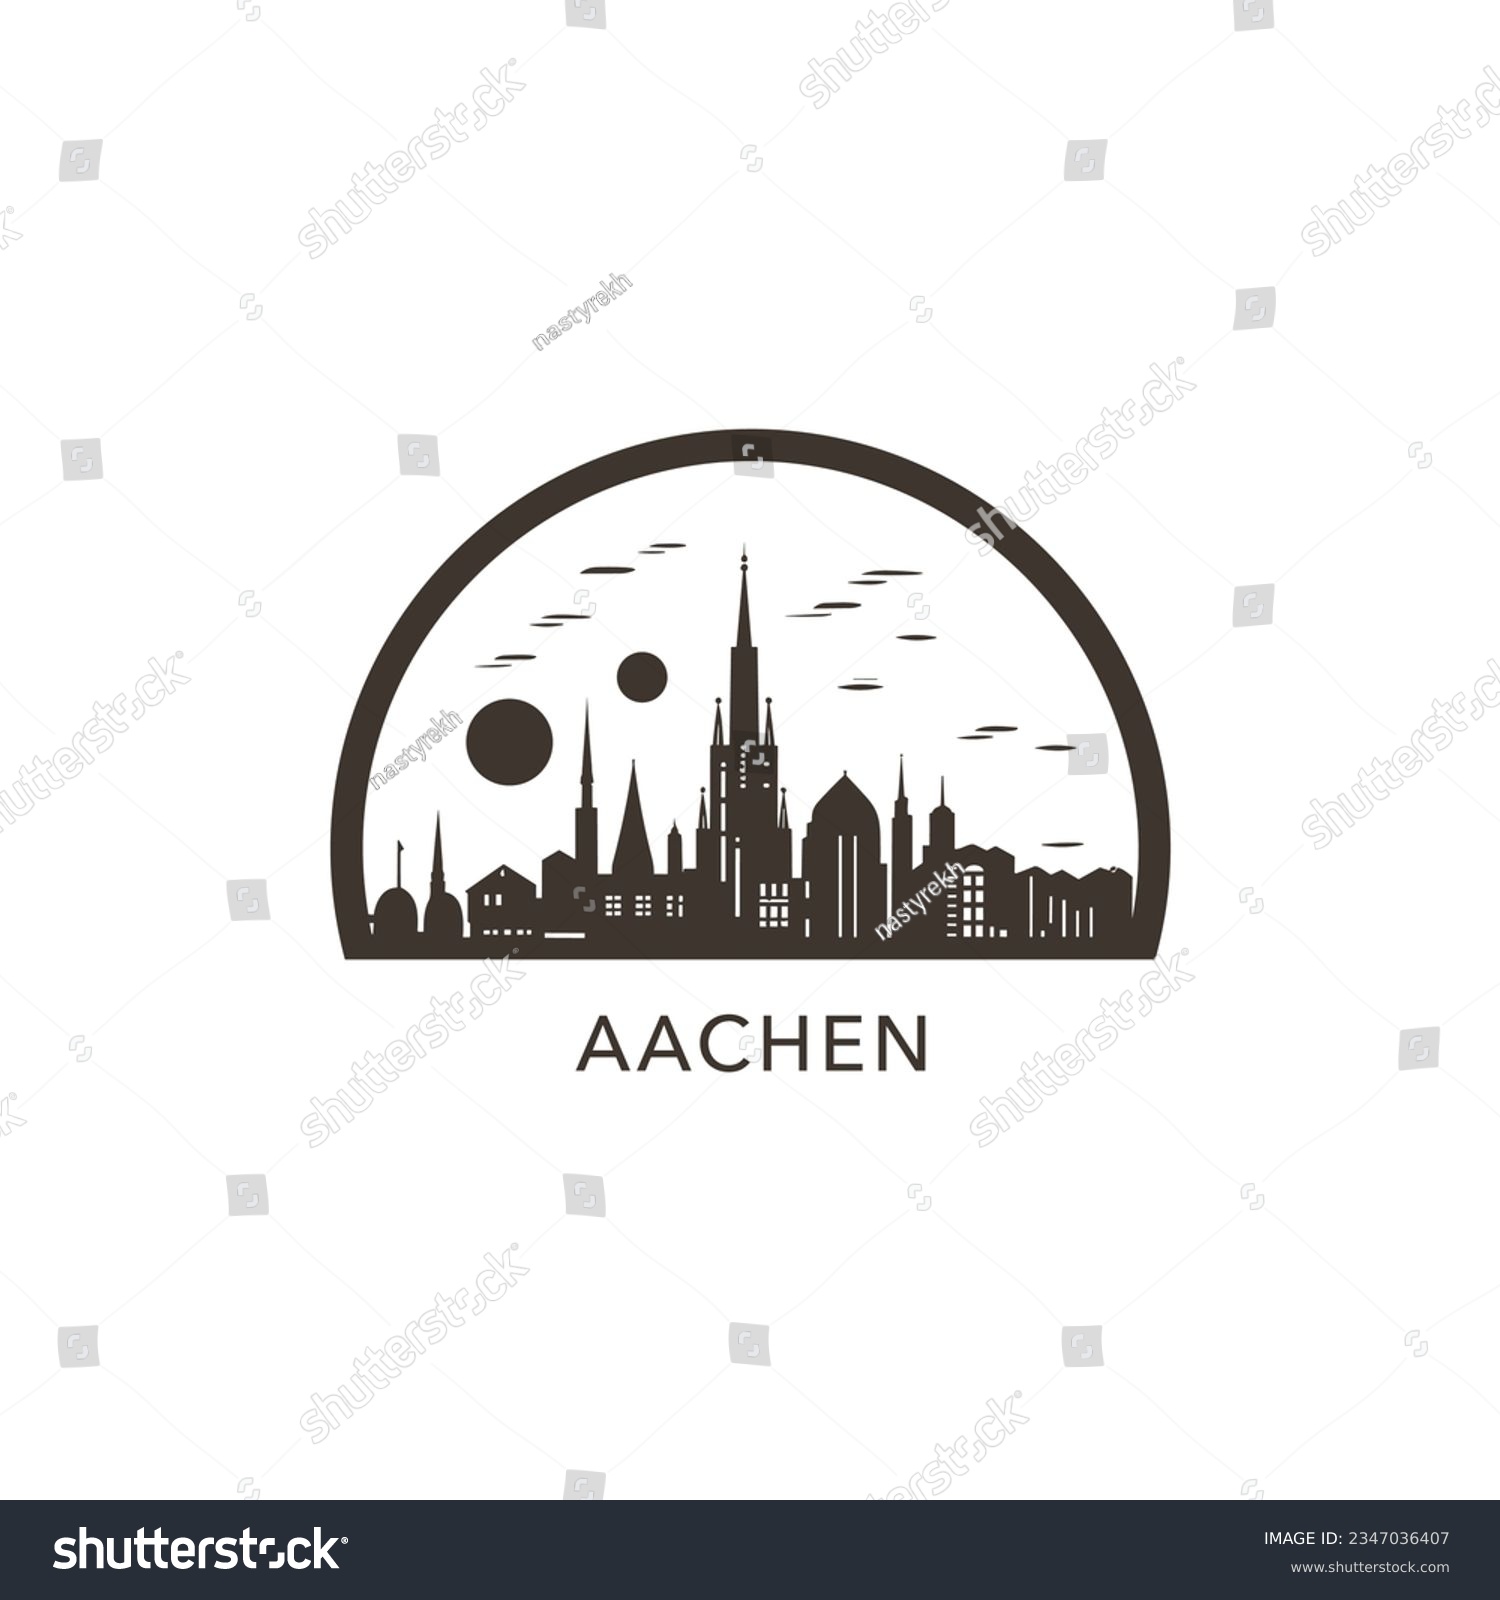 SVG of Germany Aachen cityscape skyline city panorama vector flat modern logo icon. North Rhine-Westphalia emblem idea with landmarks and building silhouettes at night svg